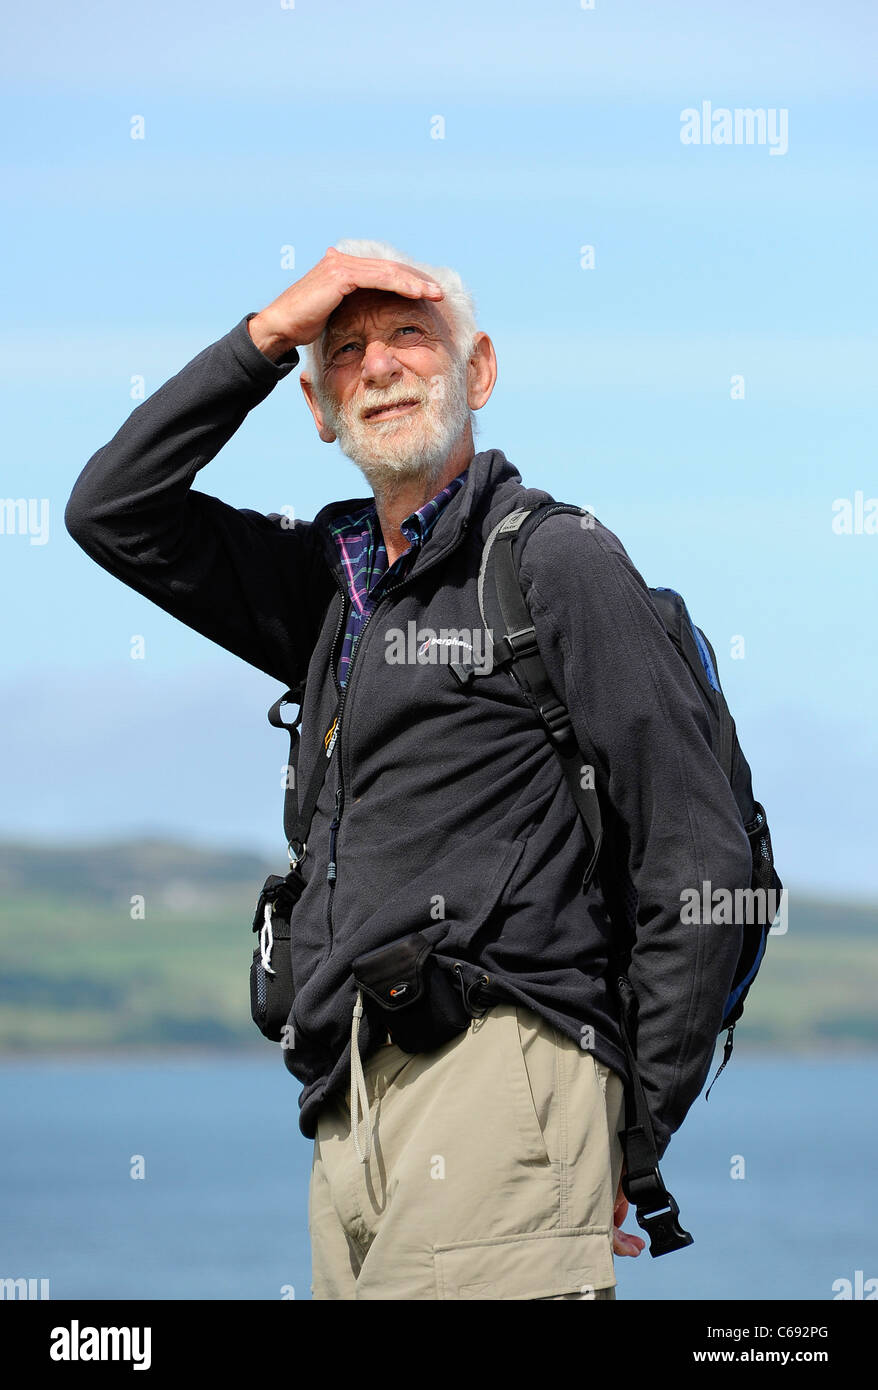 Rambler in Moelfre, Anglesey, North Wales surveys his surroundings. Stock Photo